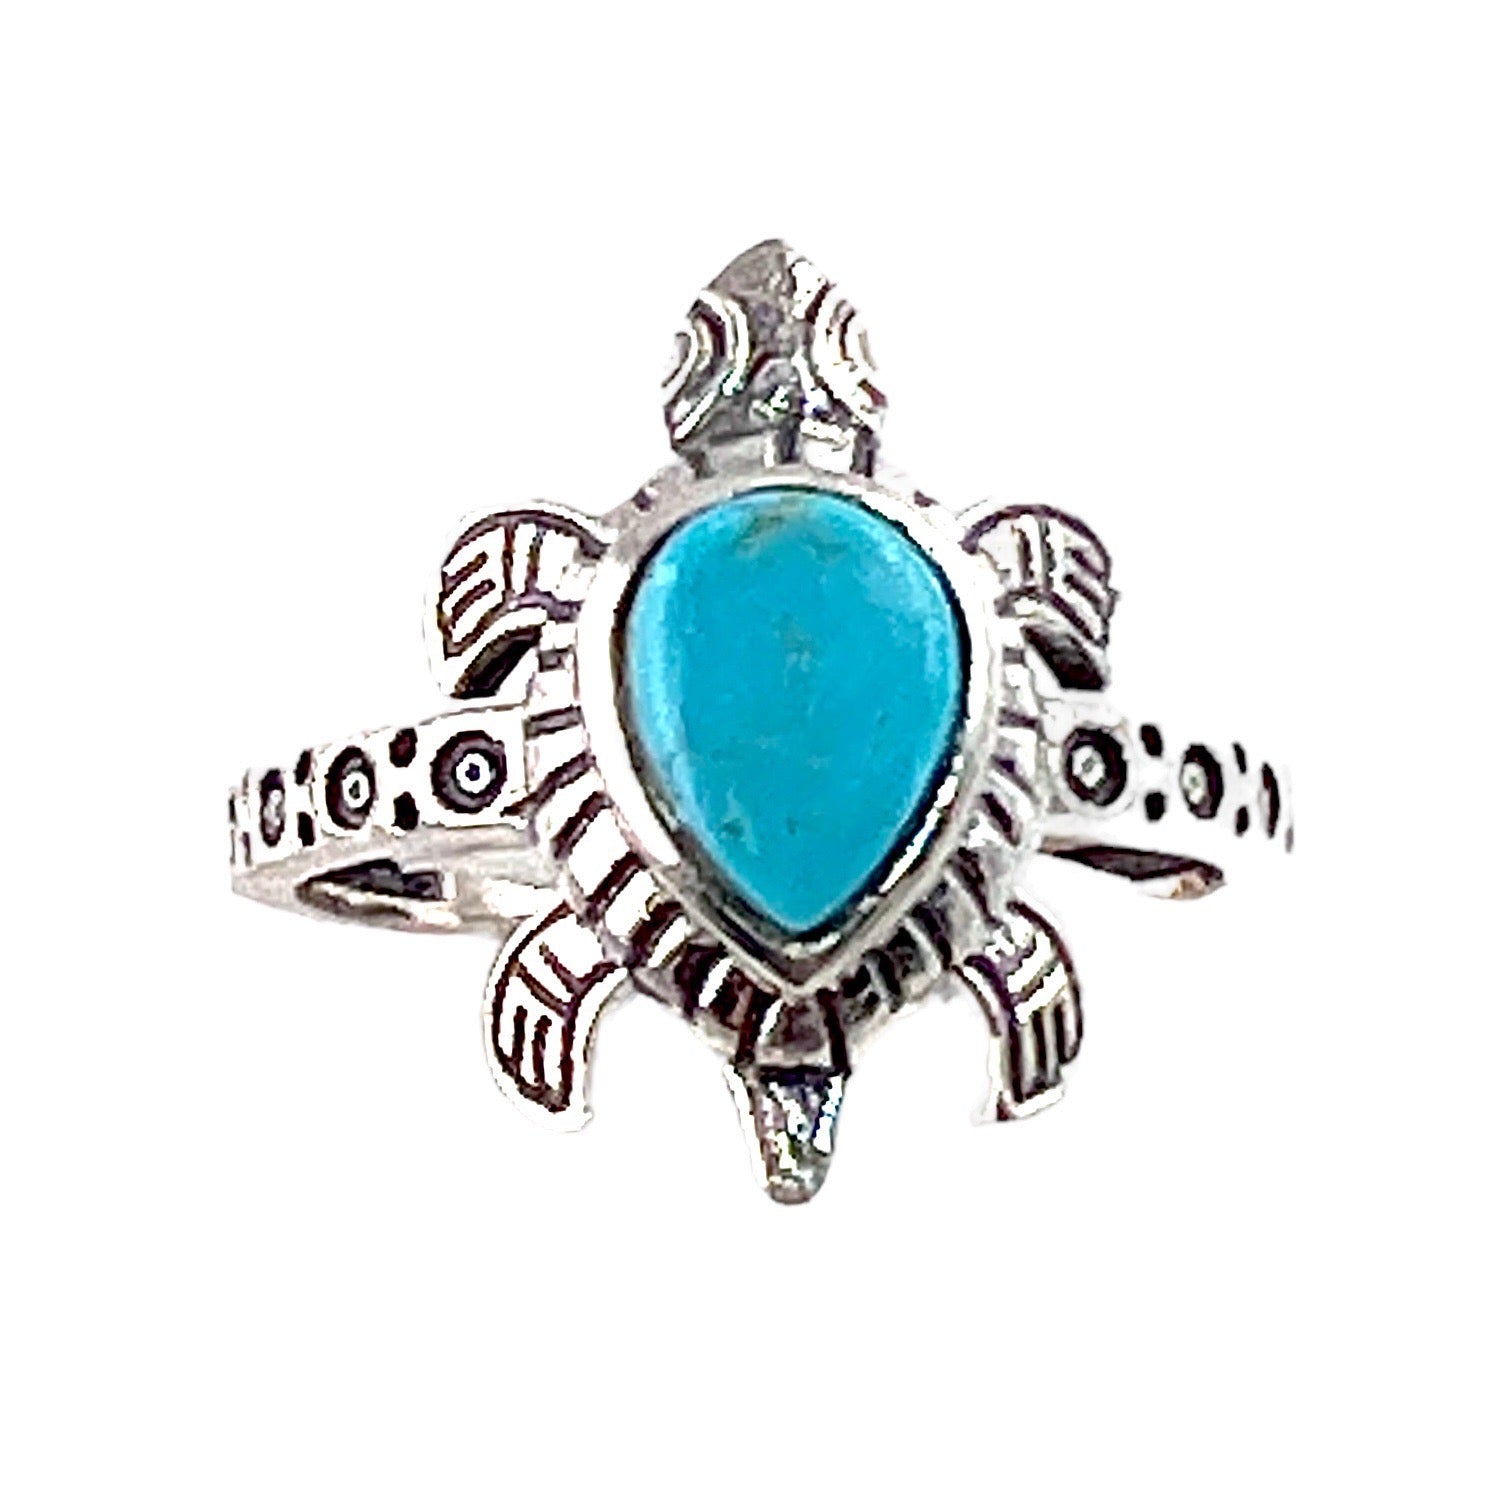 Turquoise Turtle Sterling Silver Ring - Keja Designs Jewelry